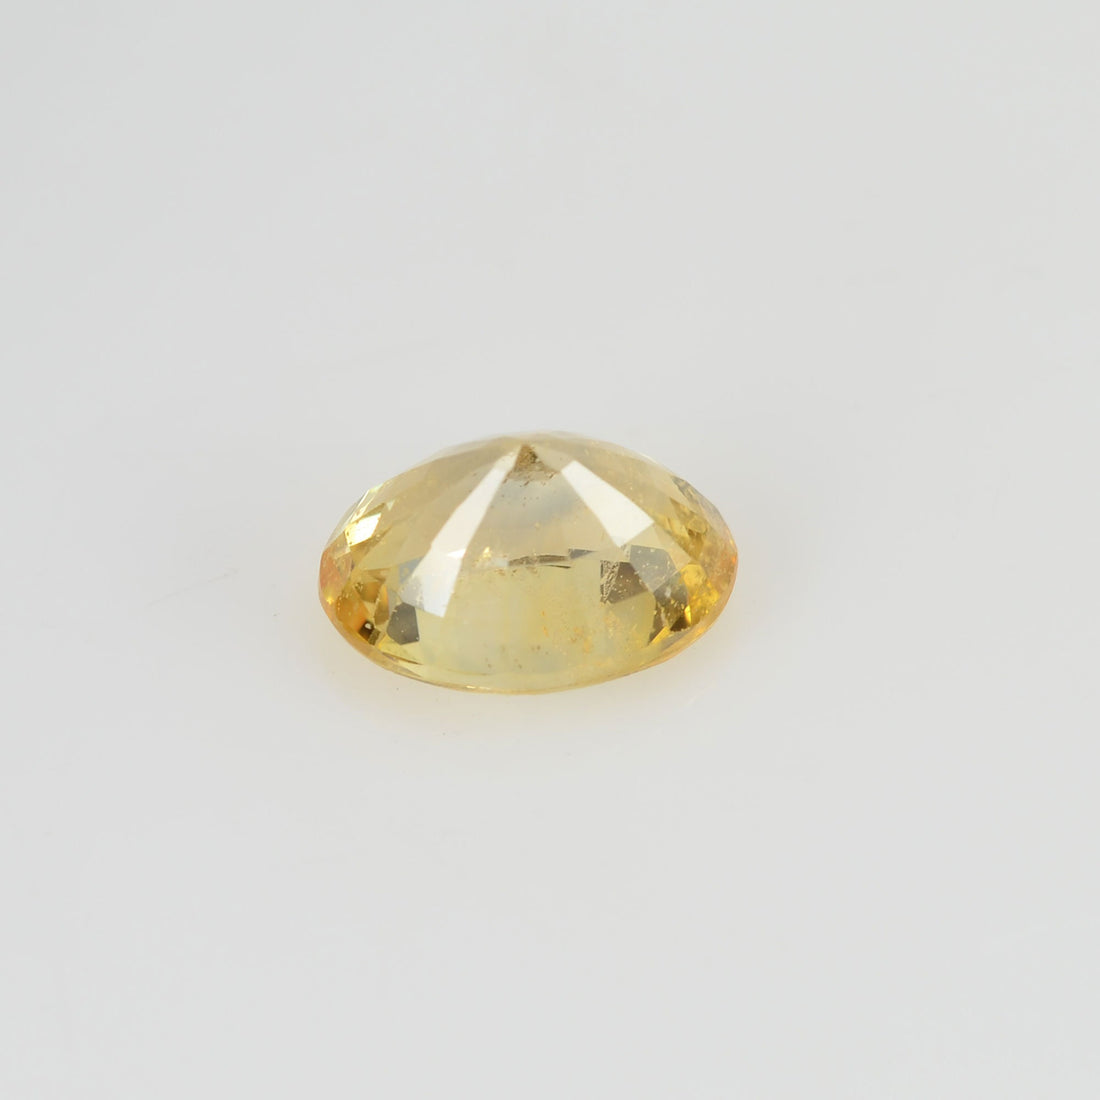 1.20 cts Natural Yellow Sapphire Loose Gemstone Oval Cut